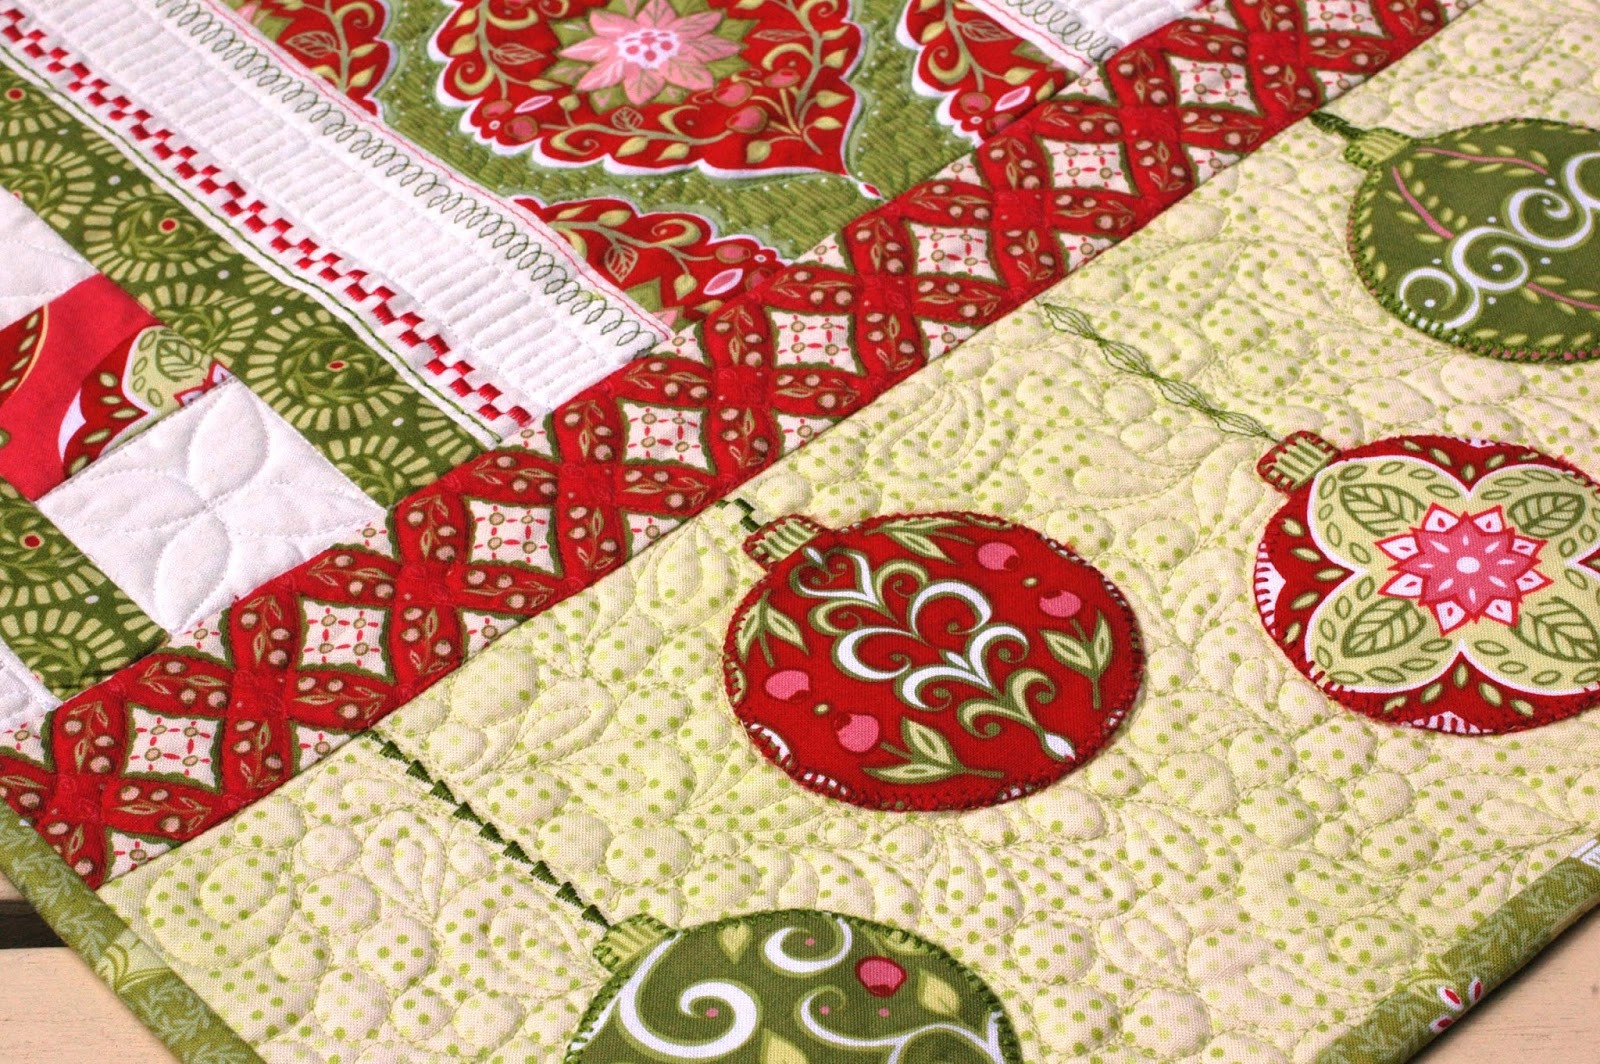 Free Christmas Table Runner Patterns
 Amanda Murphy Design plimentary Holiday Bouquet Table